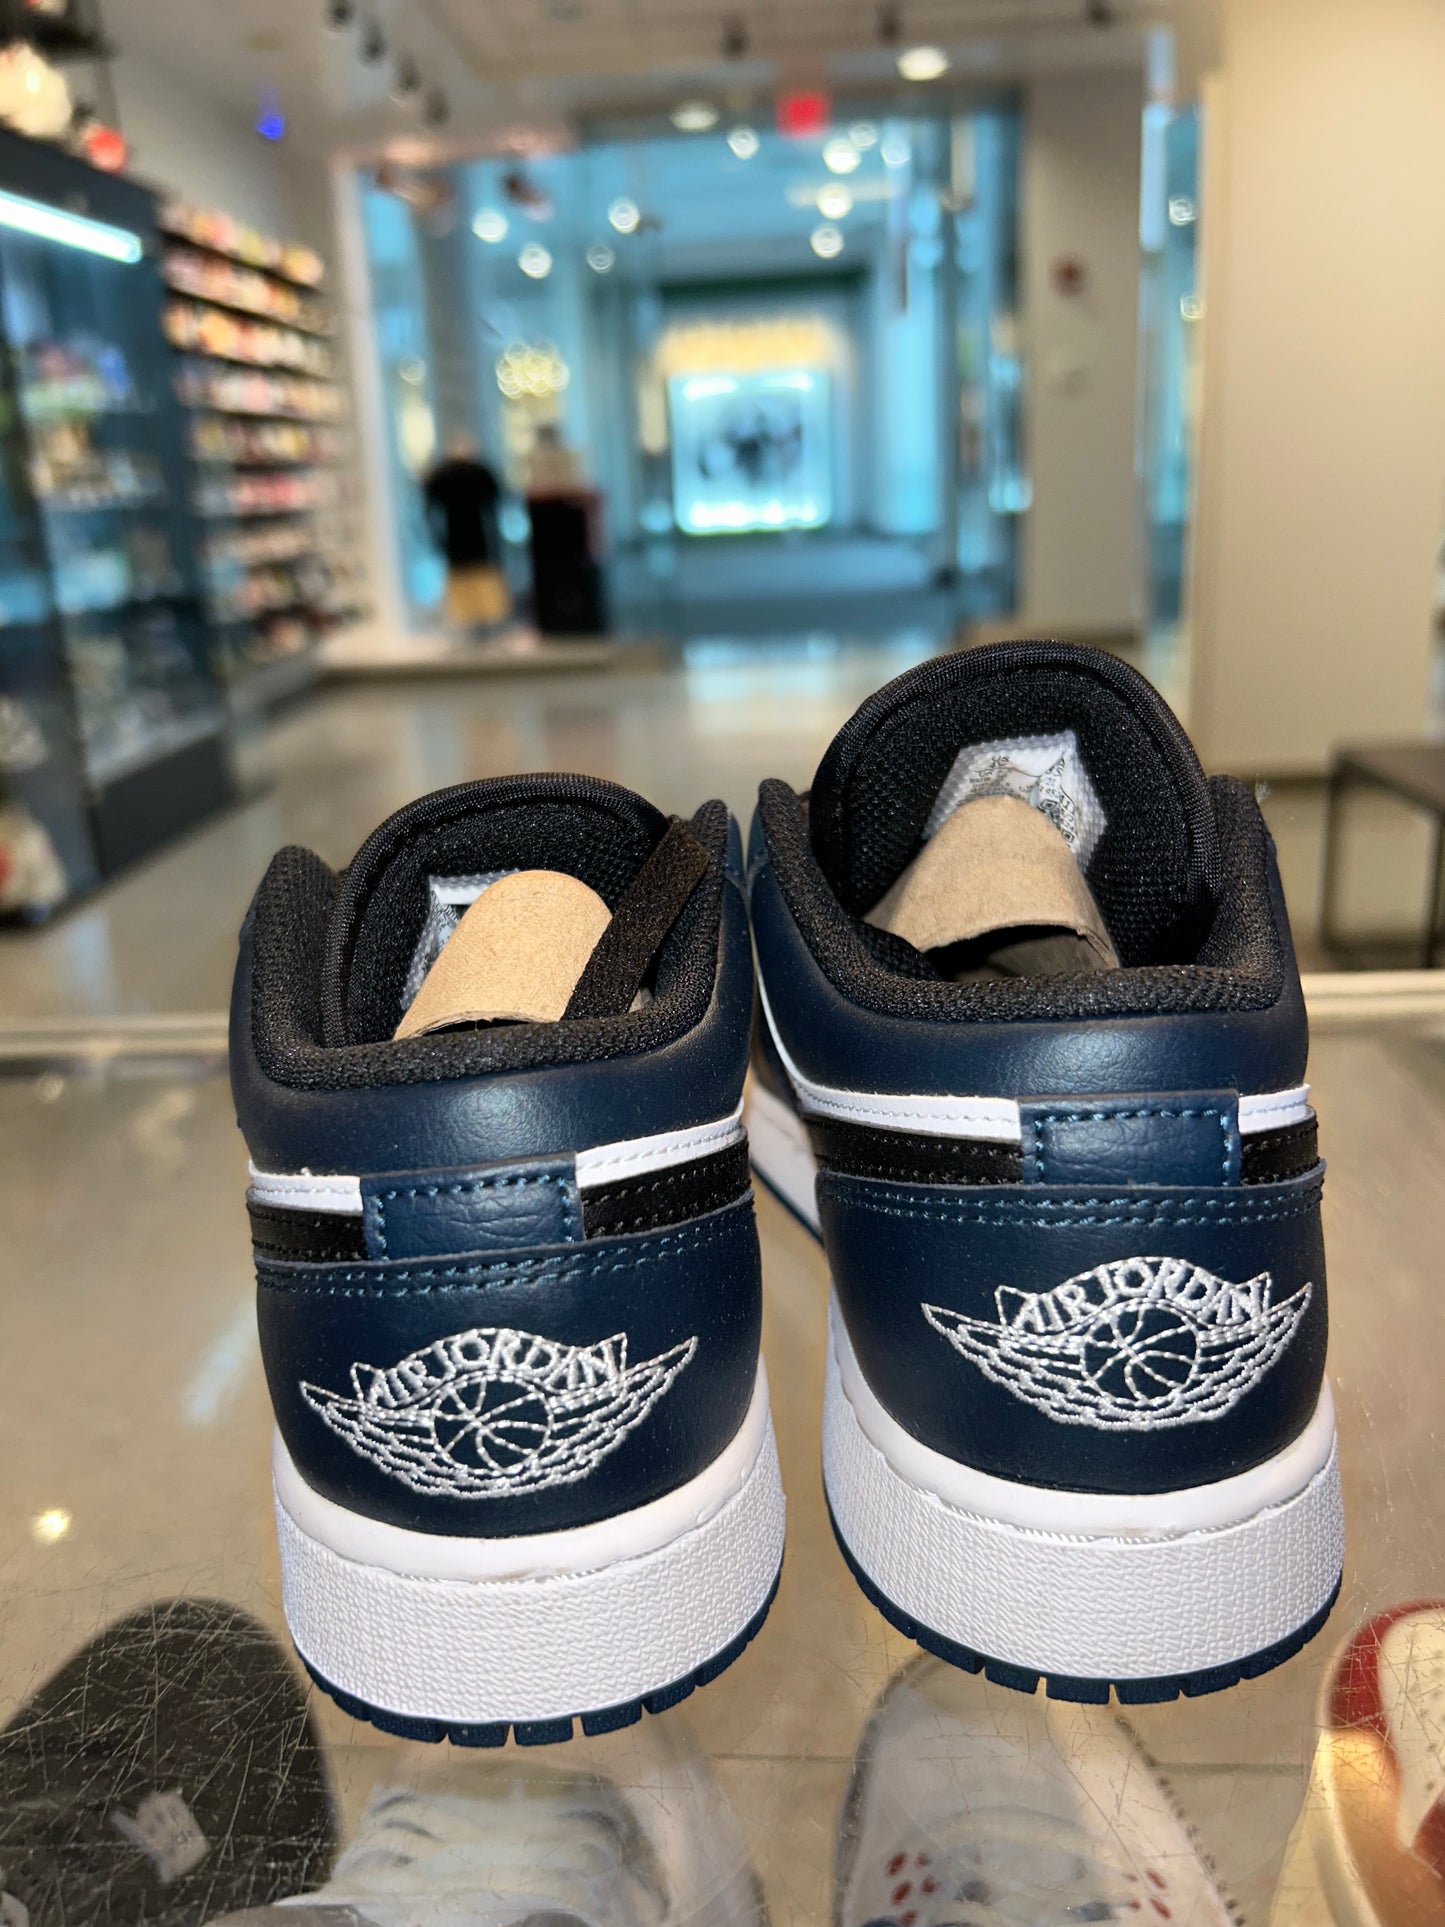 Size 4y Air Jordan 1 Low “Armory Navy” Brand New (Mall)